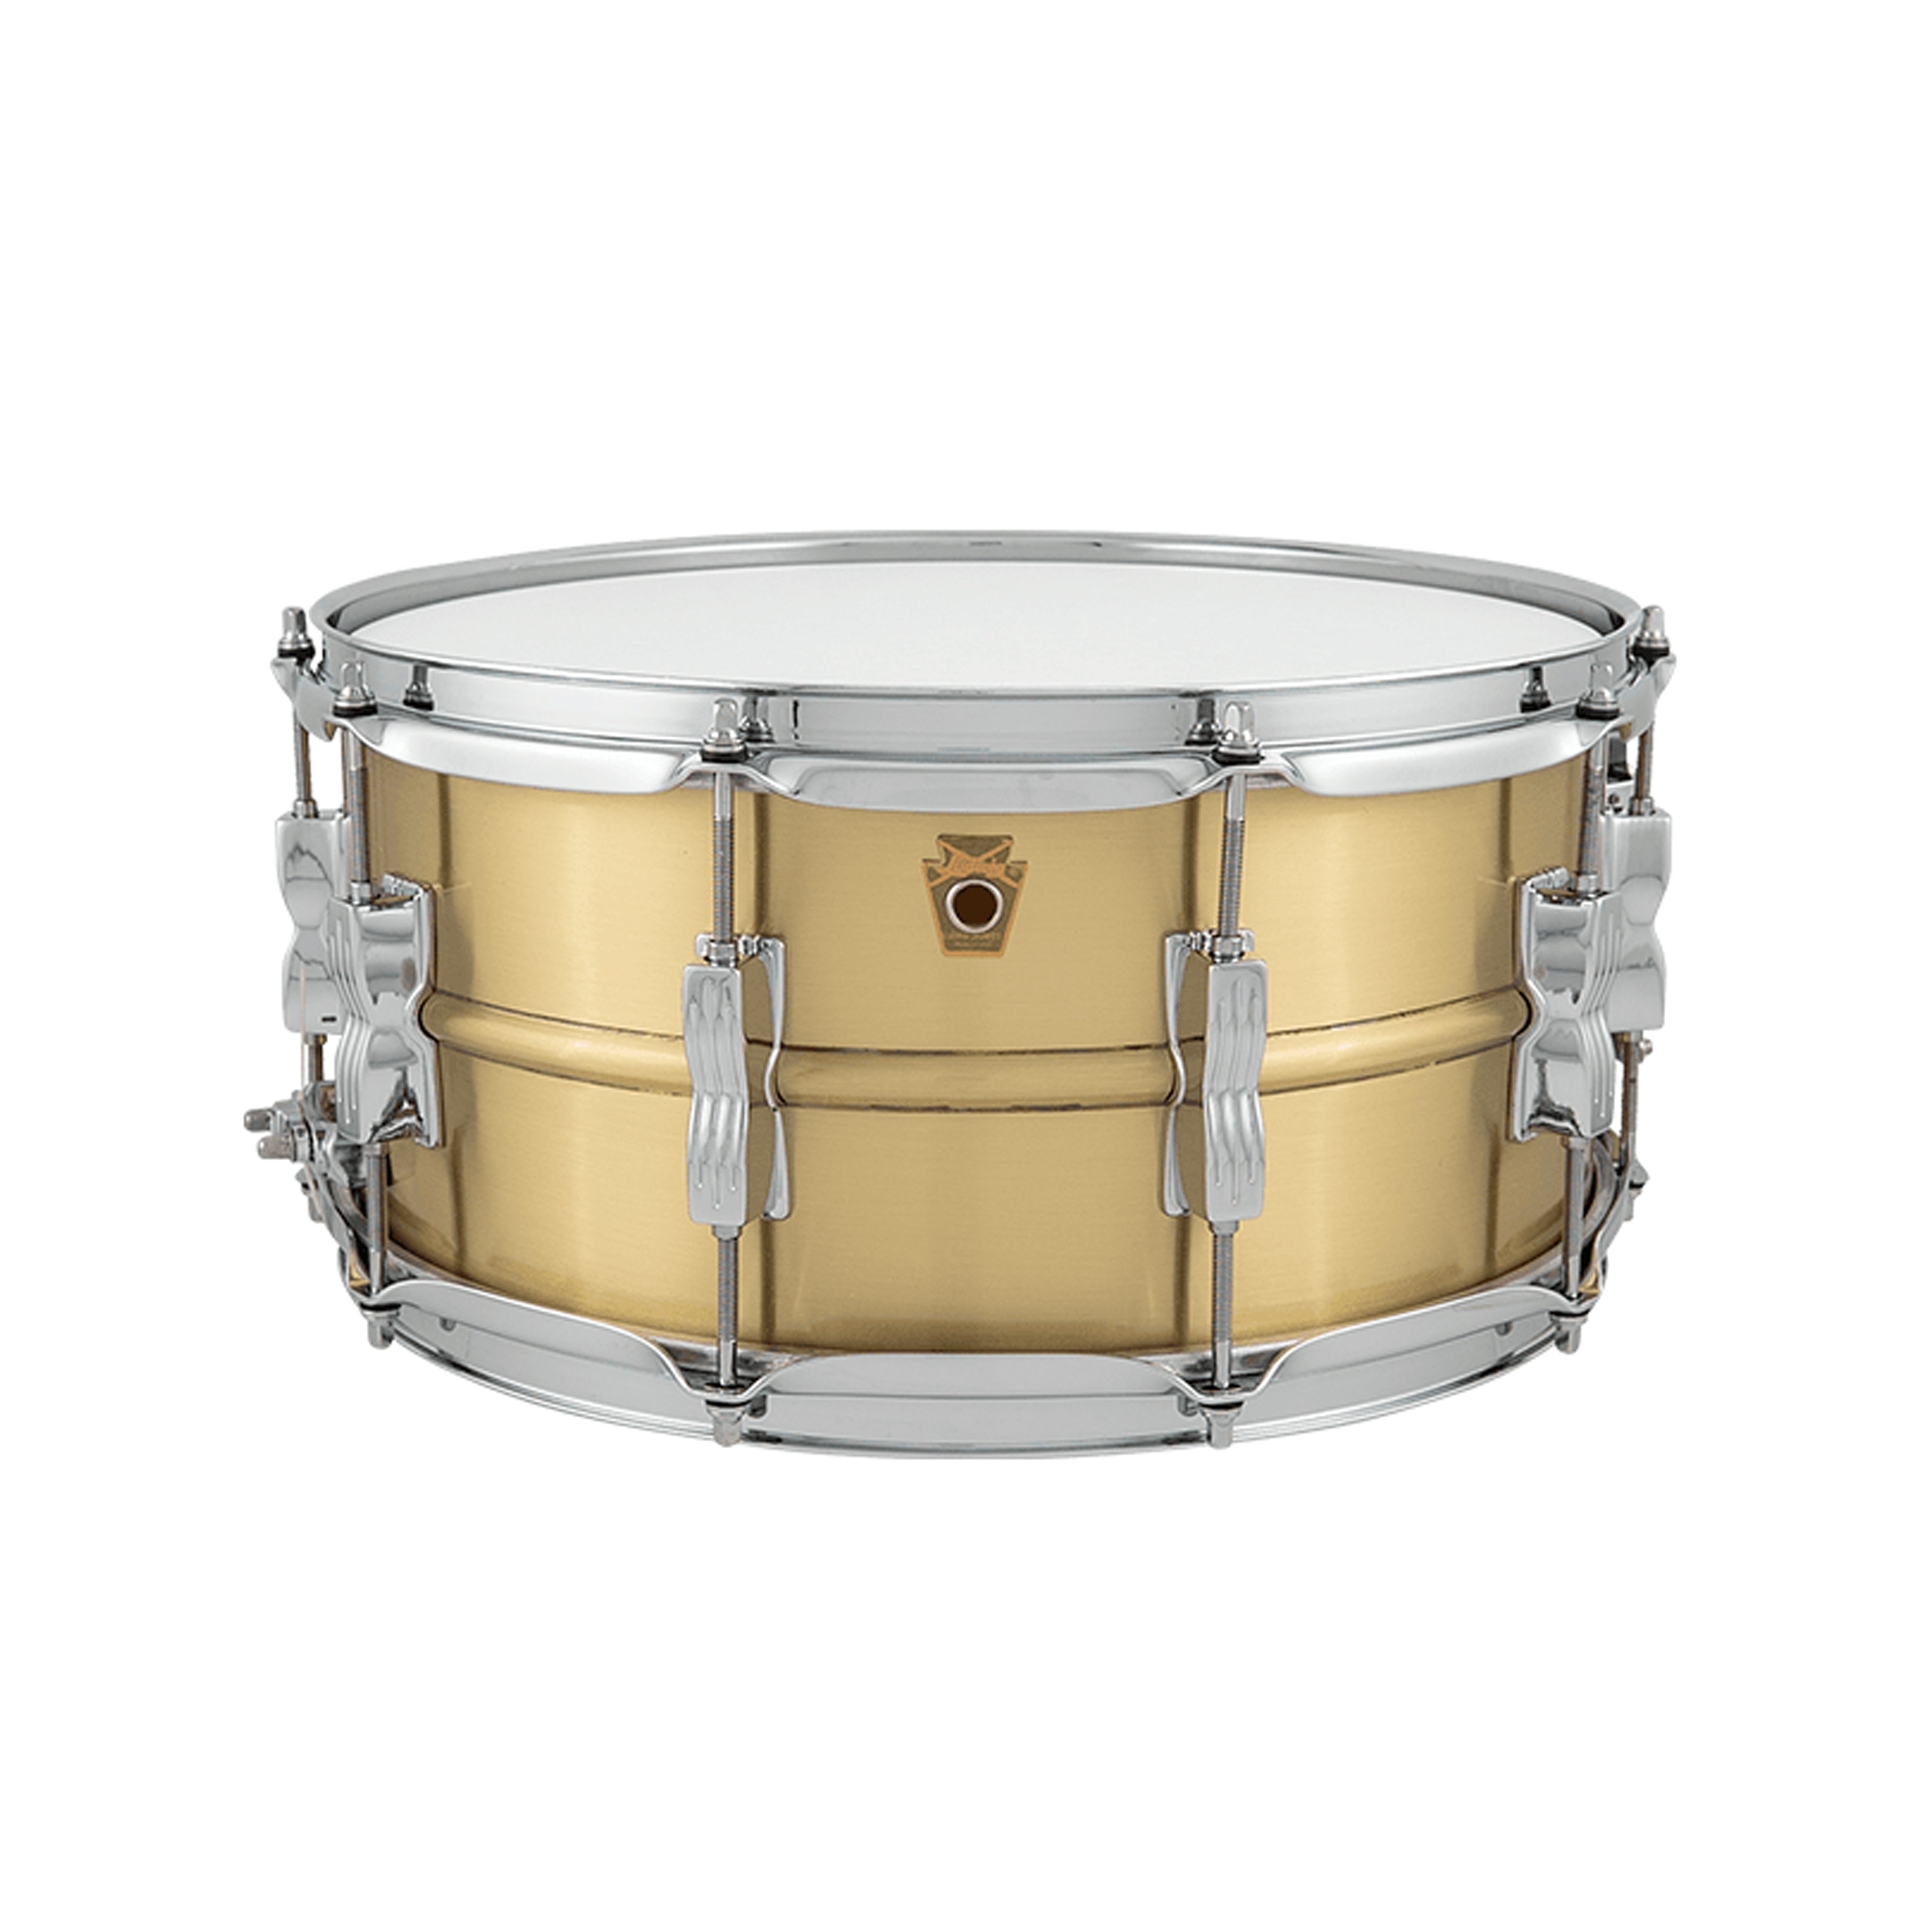 Ludwig LB654B 6.5x14inch Acro Brass Snare Drum